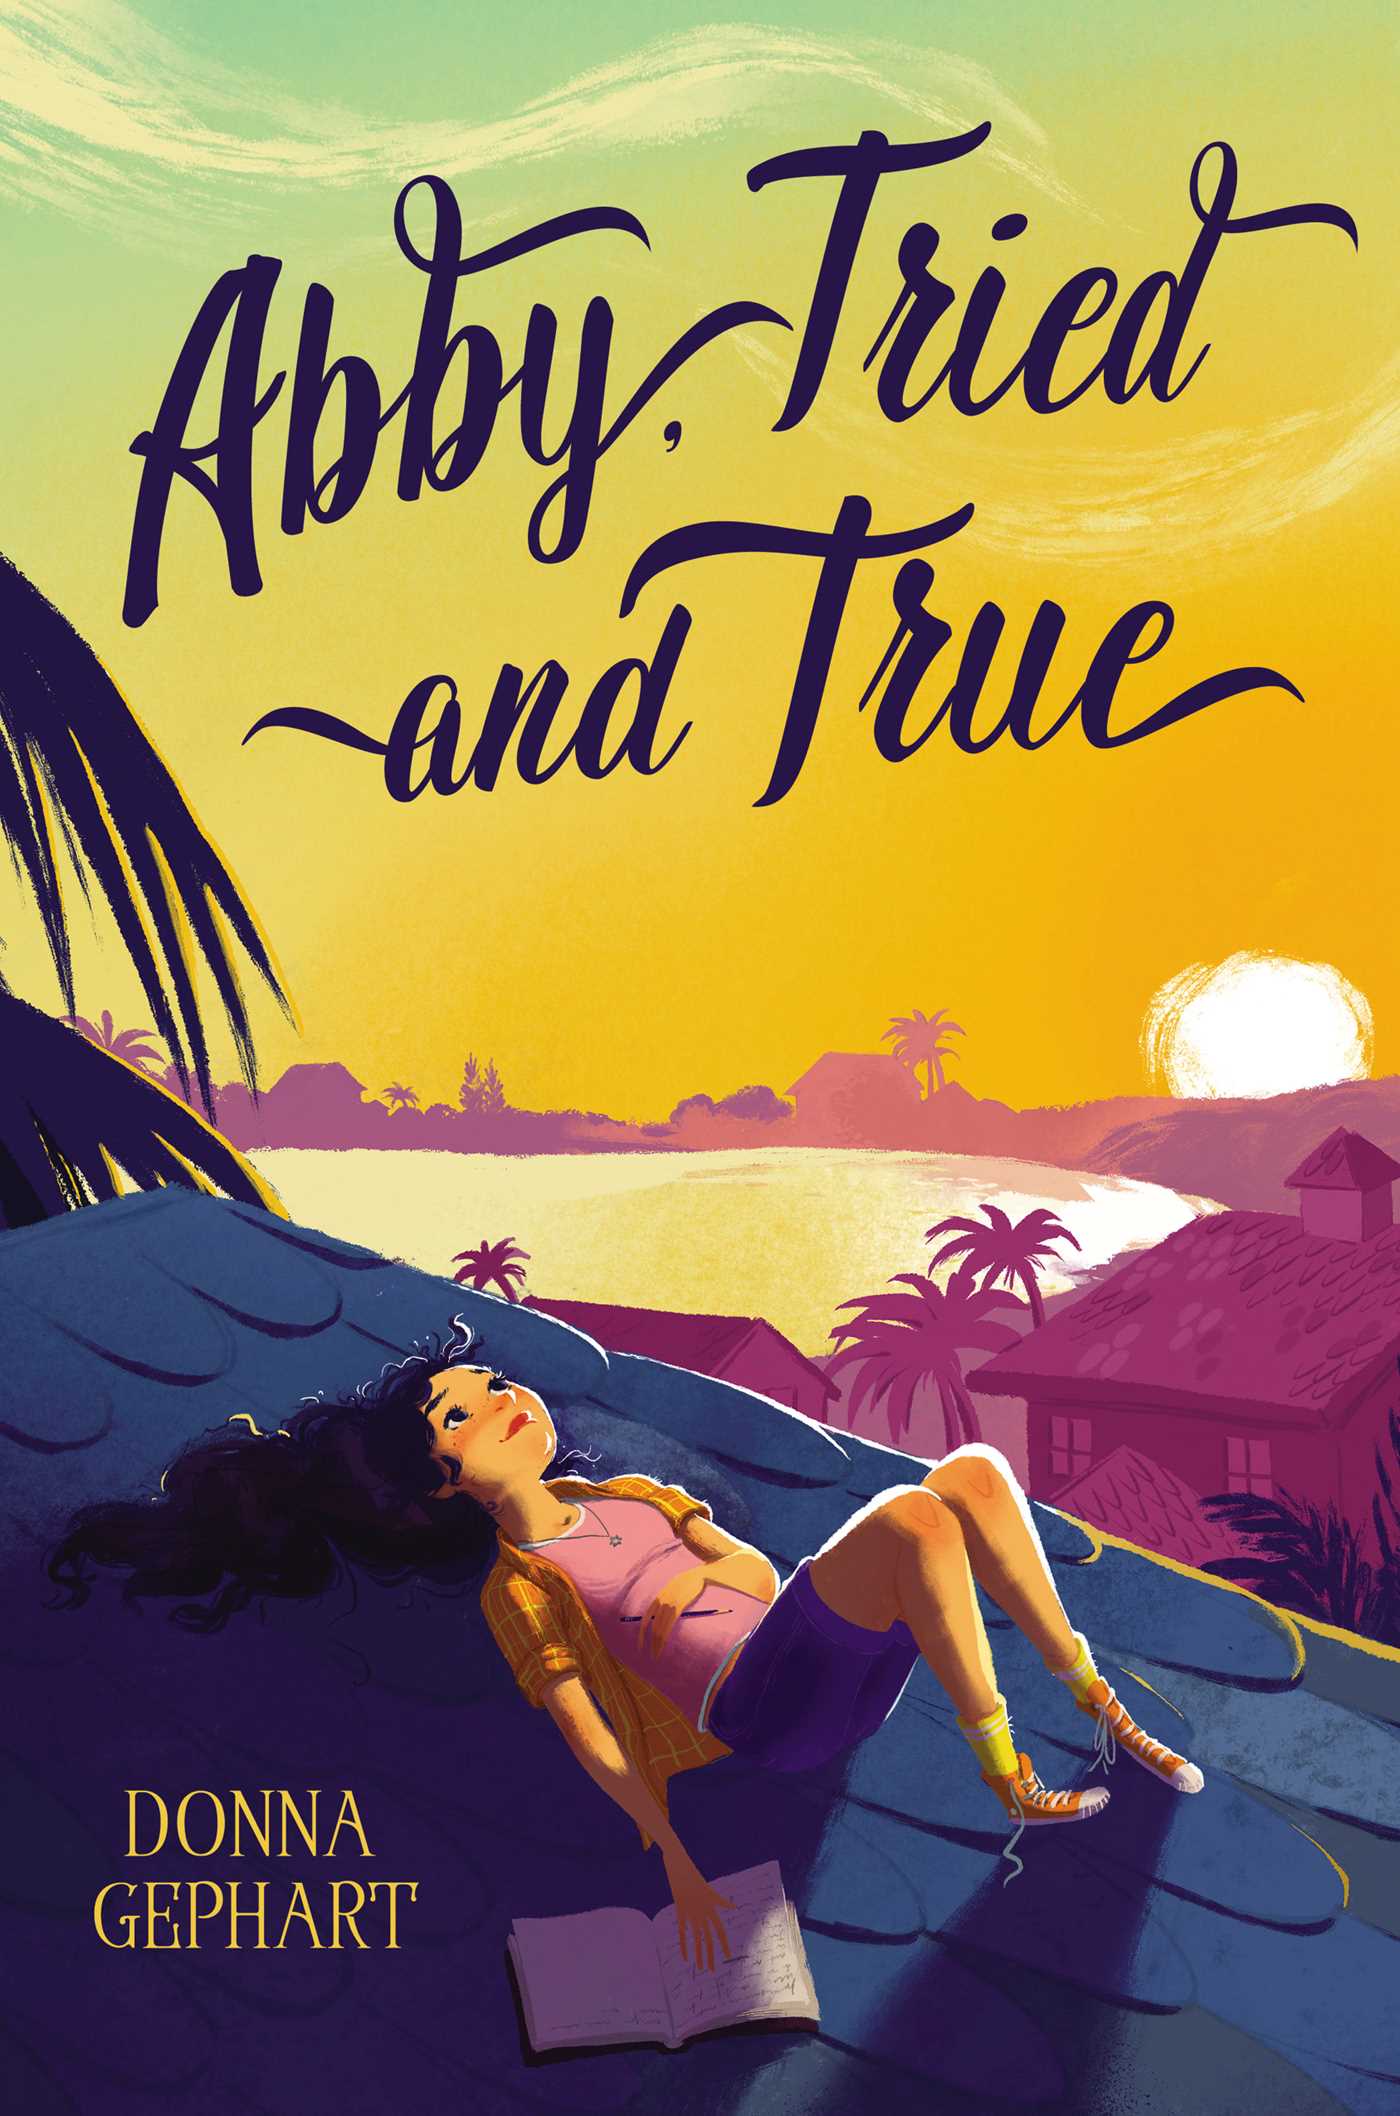 Image for "Abby, Tried and True"